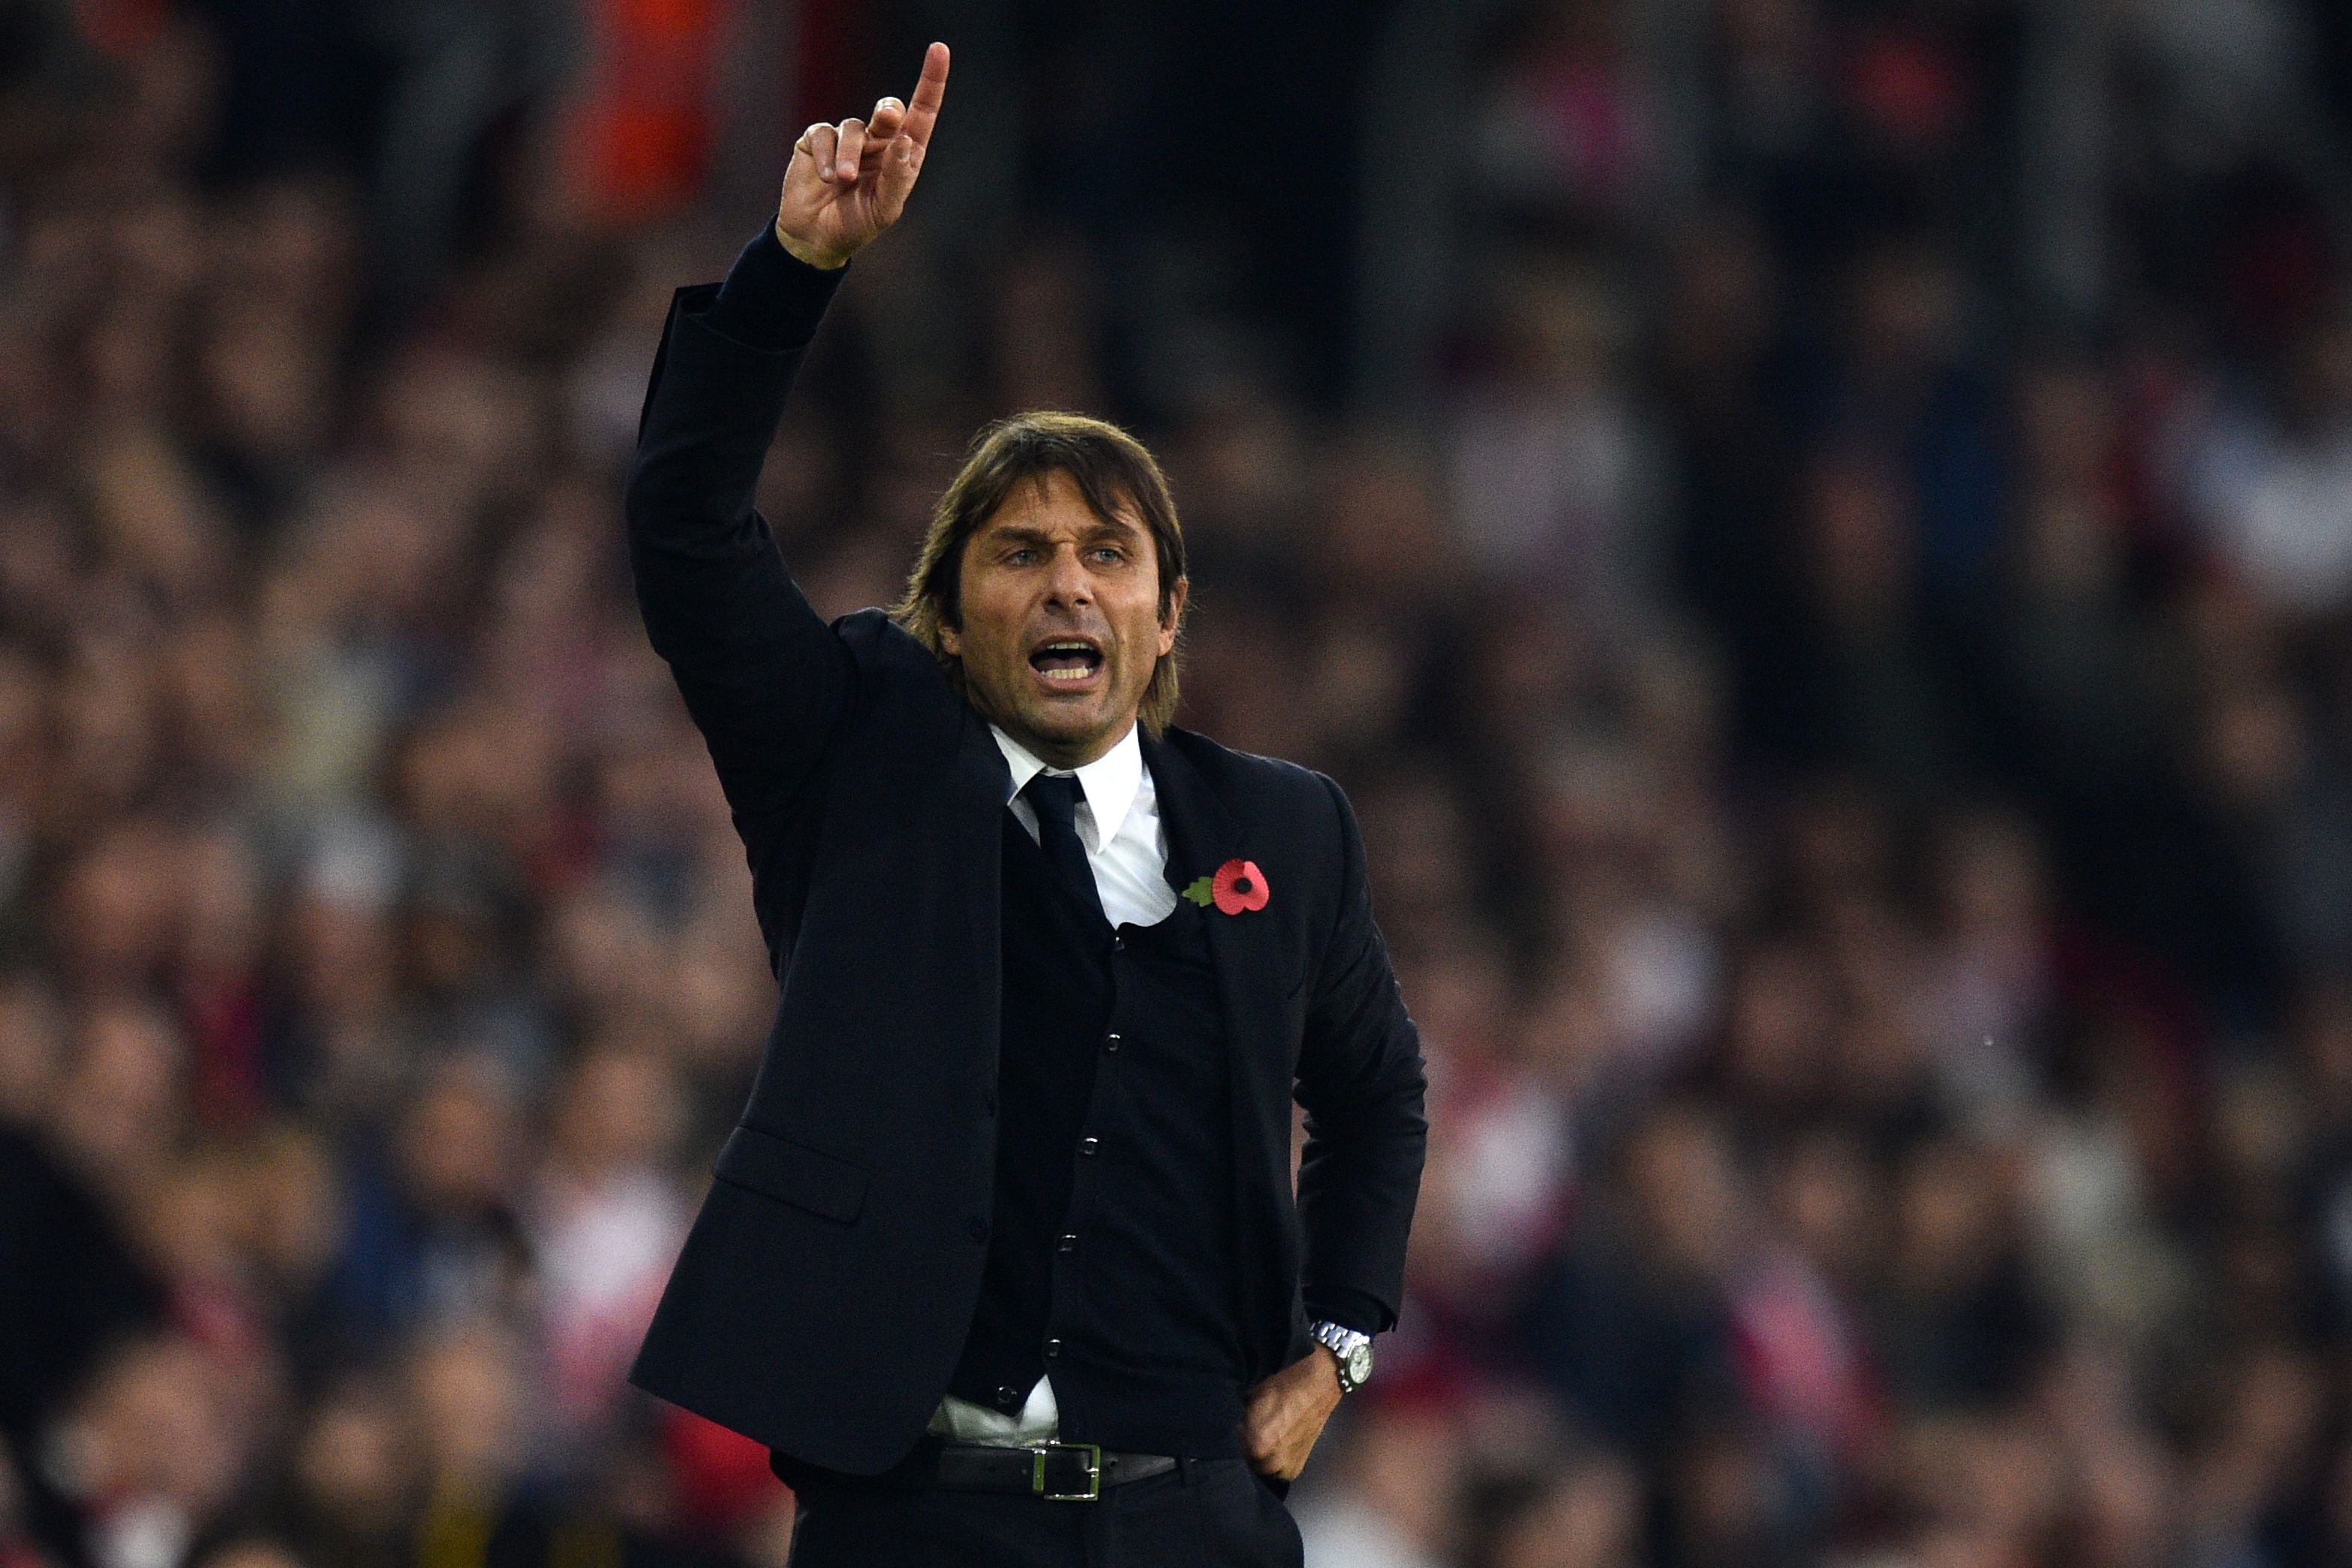 Chelsea's Italian head coach Antonio Conte gestures from the touchline during the English Premier League football match between Southampton and Chelsea at St Mary's Stadium in Southampton, southern England on October 30, 2016. / AFP / GLYN KIRK / RESTRICTED TO EDITORIAL USE. No use with unauthorized audio, video, data, fixture lists, club/league logos or 'live' services. Online in-match use limited to 75 images, no video emulation. No use in betting, games or single club/league/player publications.  /         (Photo credit should read GLYN KIRK/AFP/Getty Images)